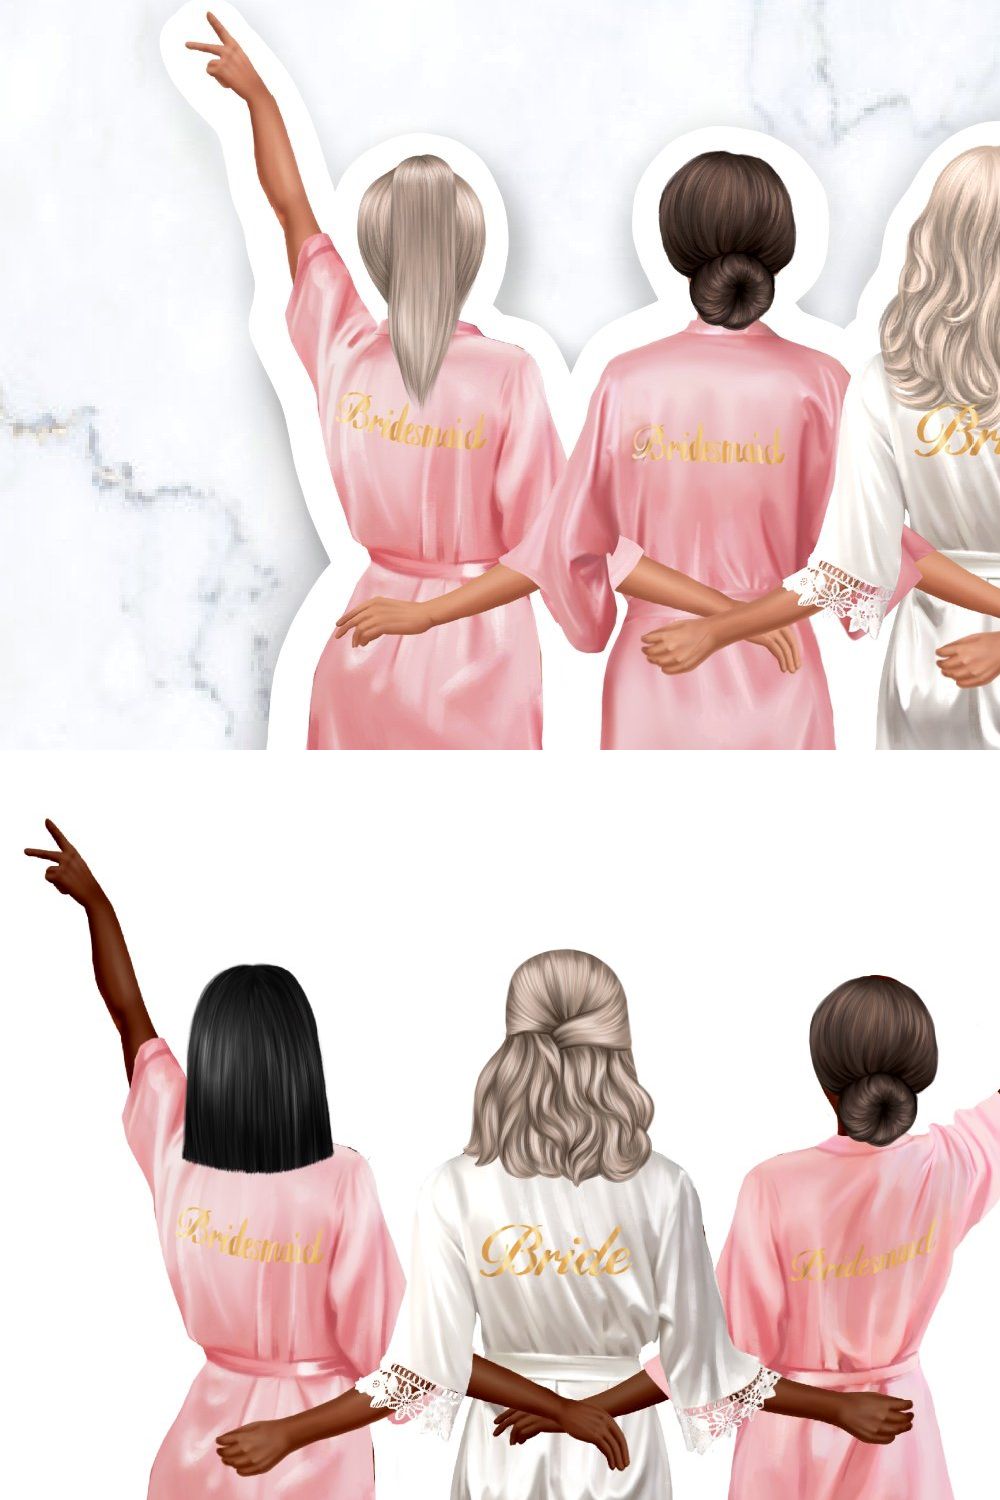 Bridesmaid drawing Best friend clipa pinterest preview image.